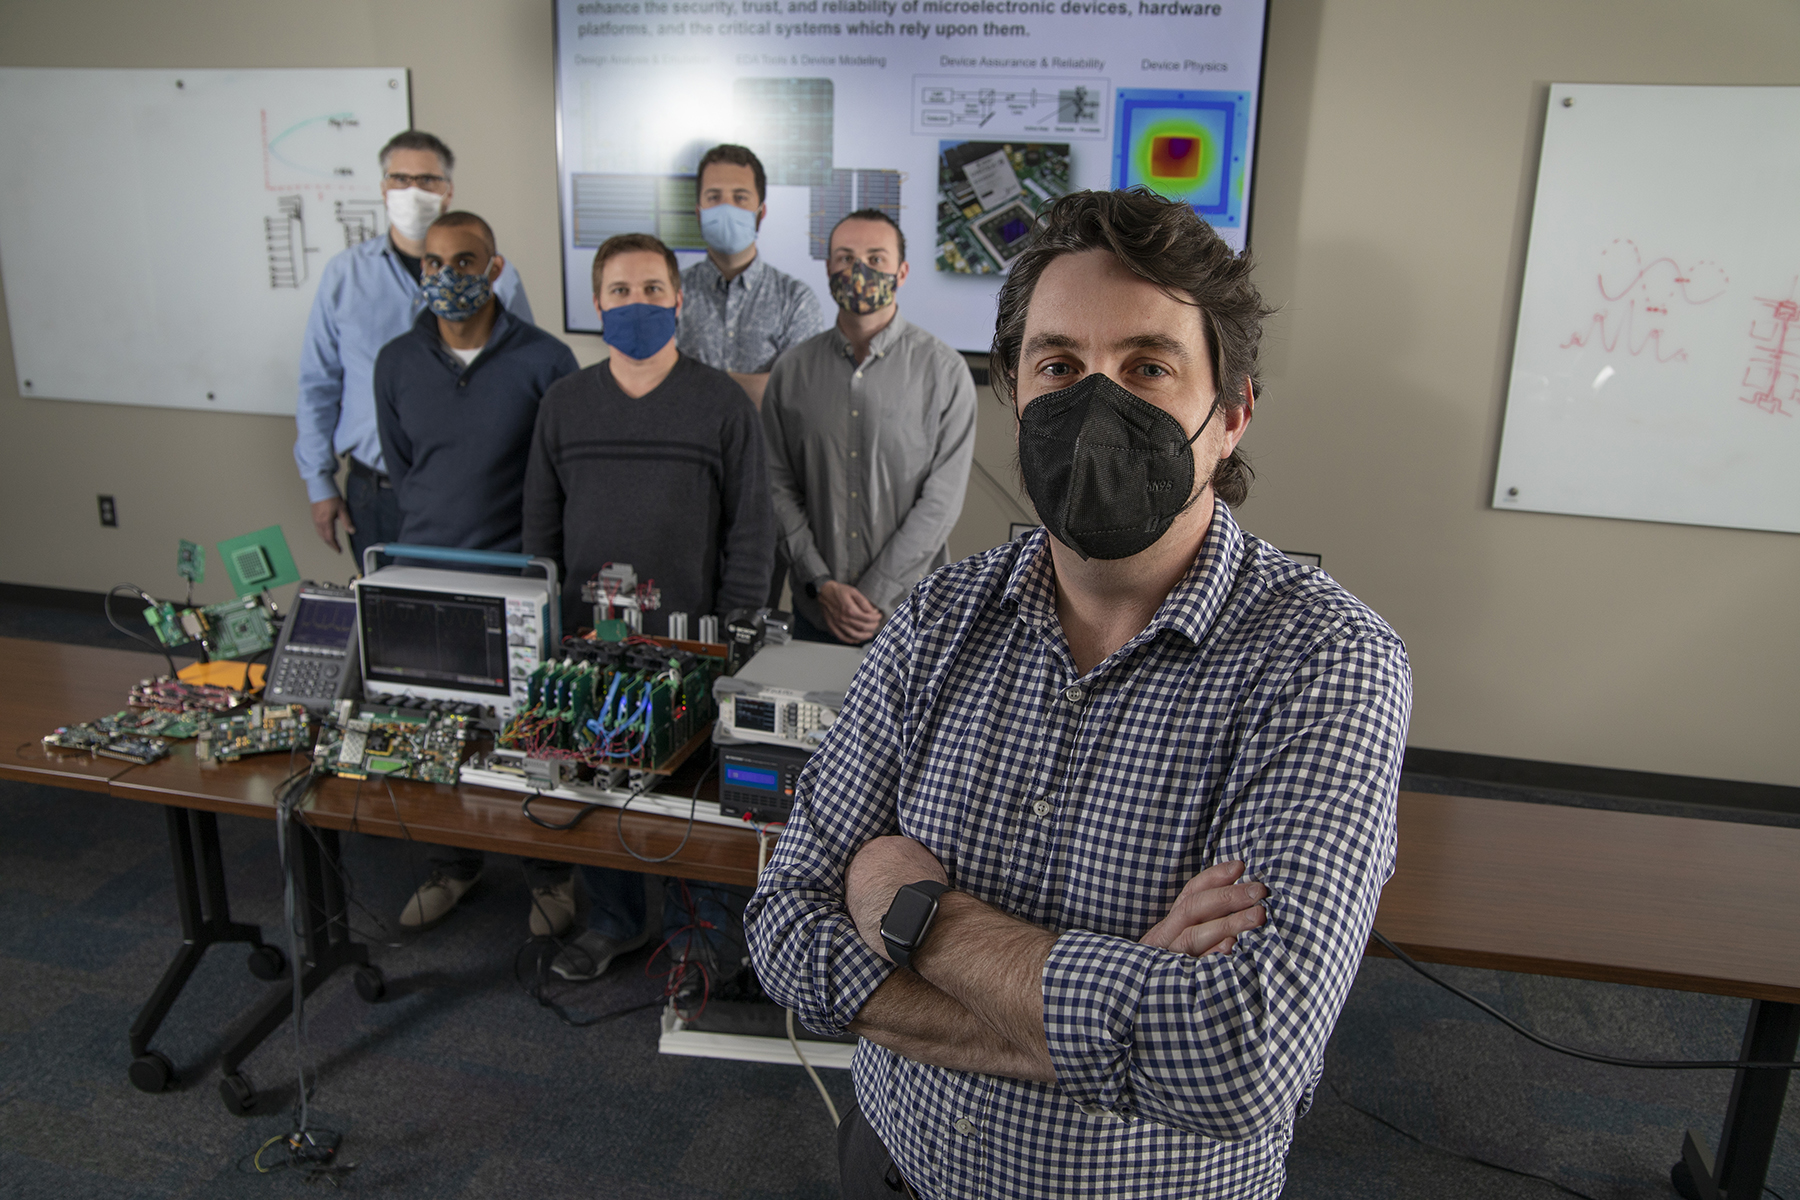 (L to R): Bill Hunter, Mike Ruiz, Chris Clark, Jay Danner, Will Stuckey and Lee W. Lerner― the leadership team of a division of faculty at GTRI, which advances applied research in hardware security and trust. (Photo credit: Christopher Moore, Georgia Tech) 